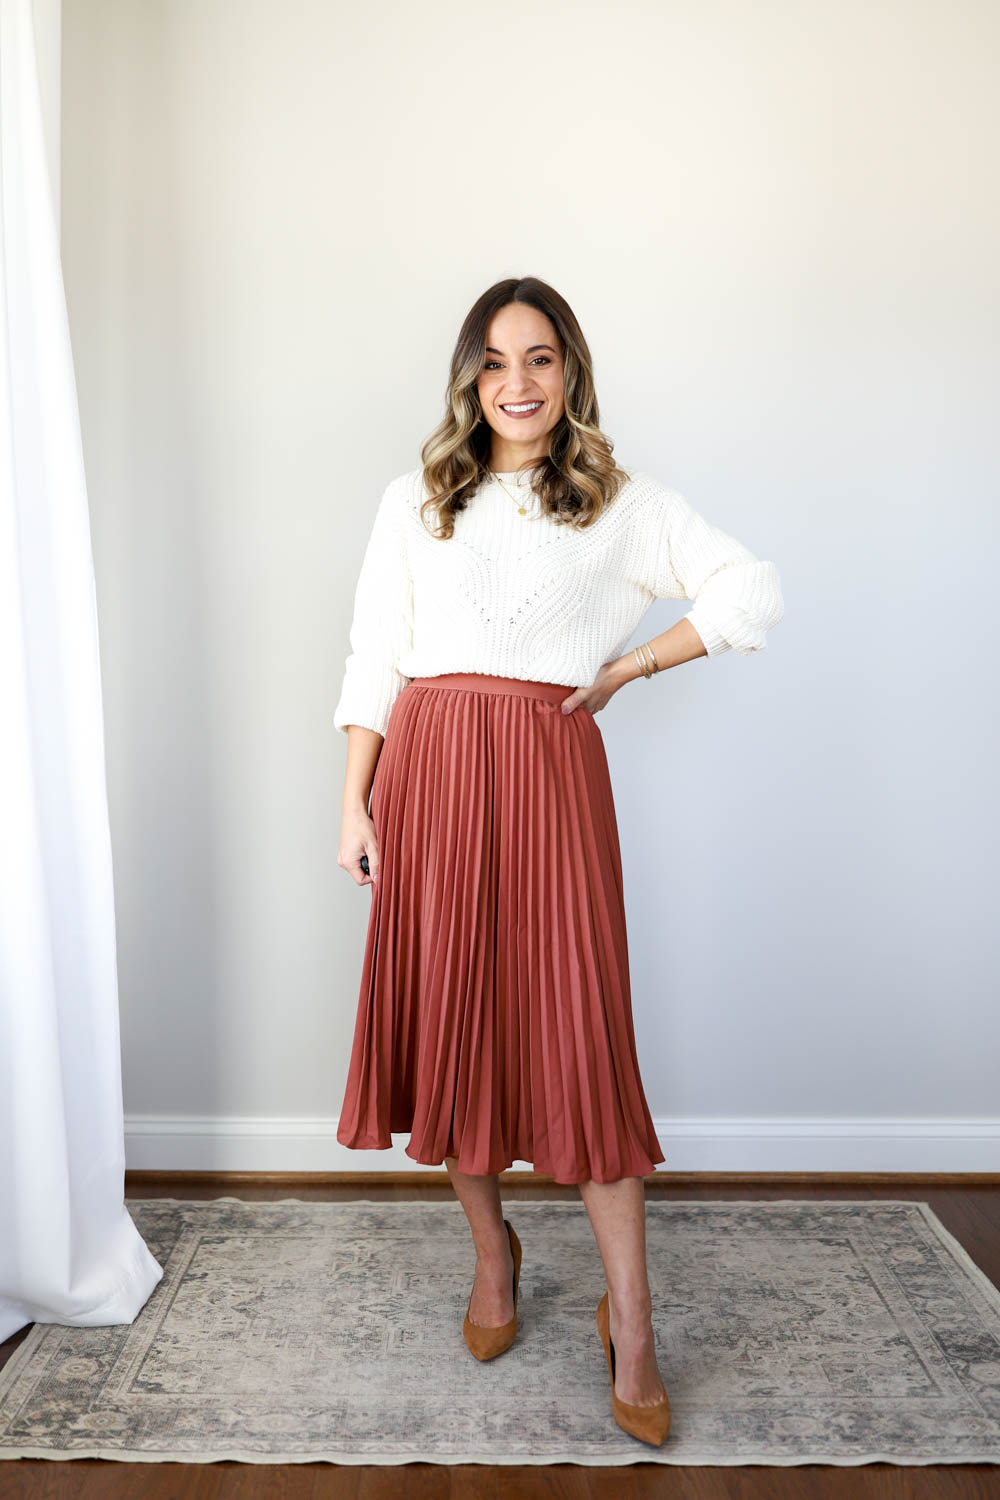 Accordion Skirt Outfits - 36 Outfits Ideas to Wear Accordion Skirts